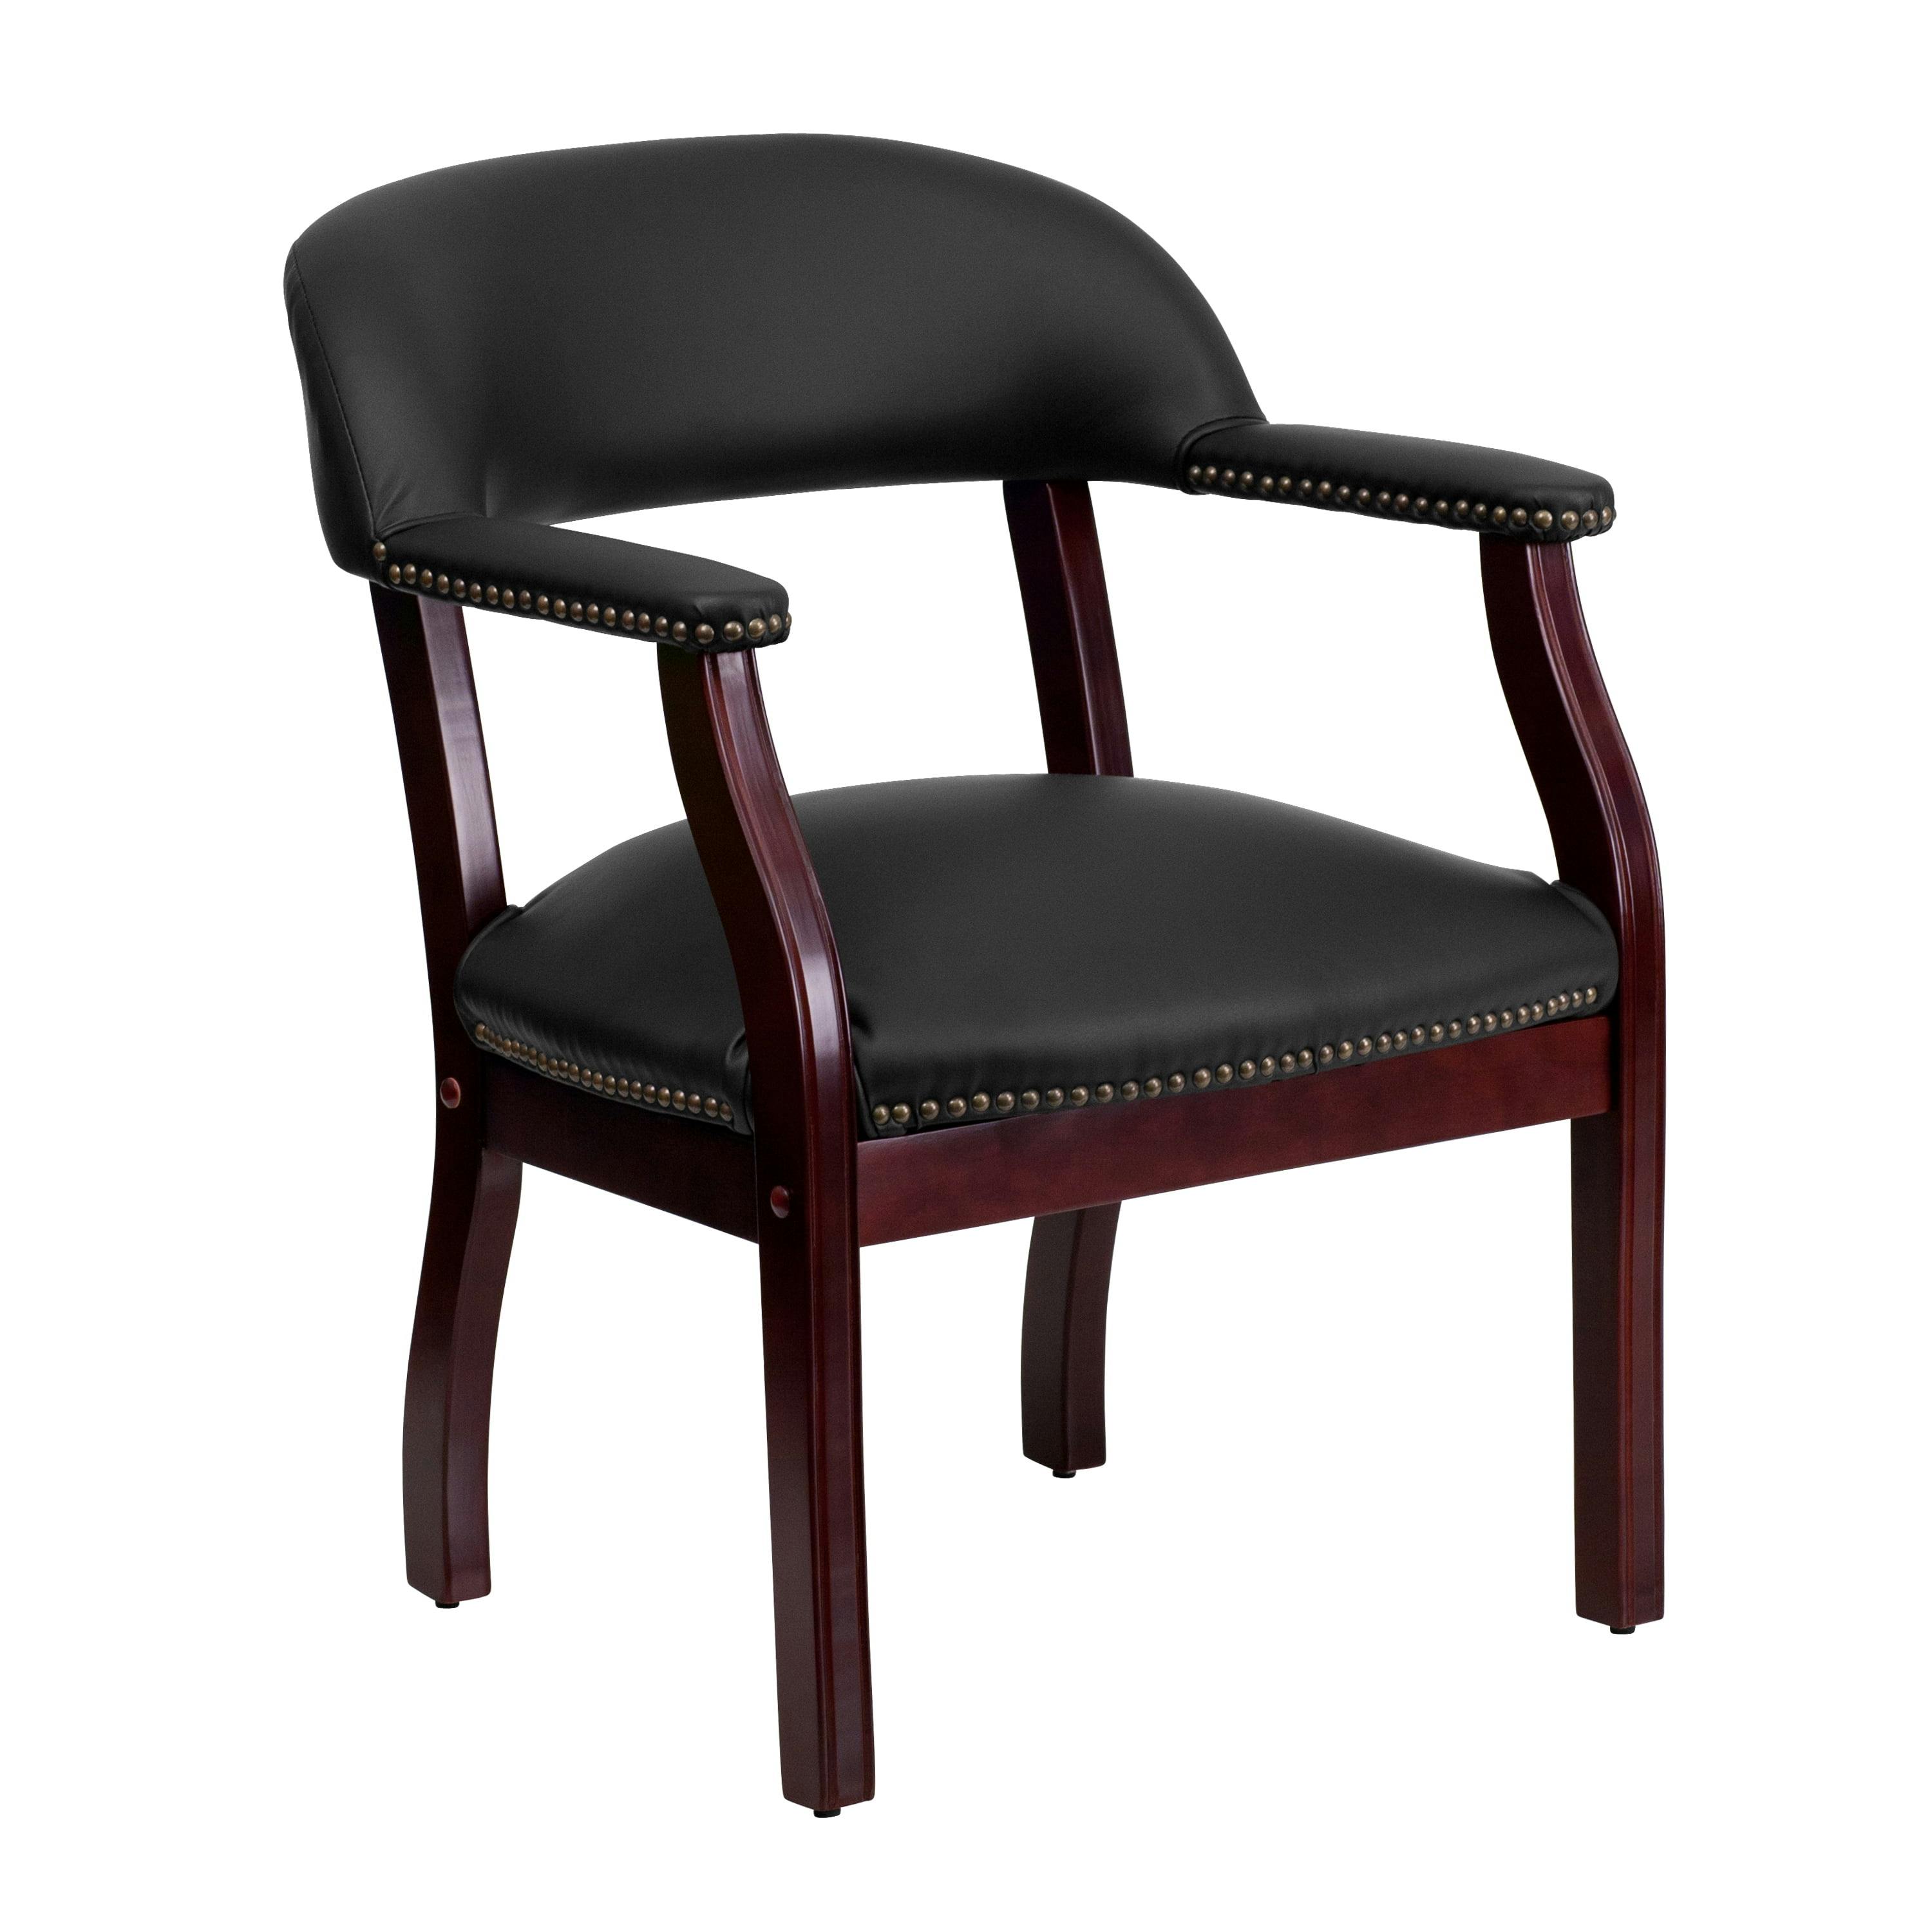 Elegant Black LeatherSoft Conference Chair with Brass Nail Accents